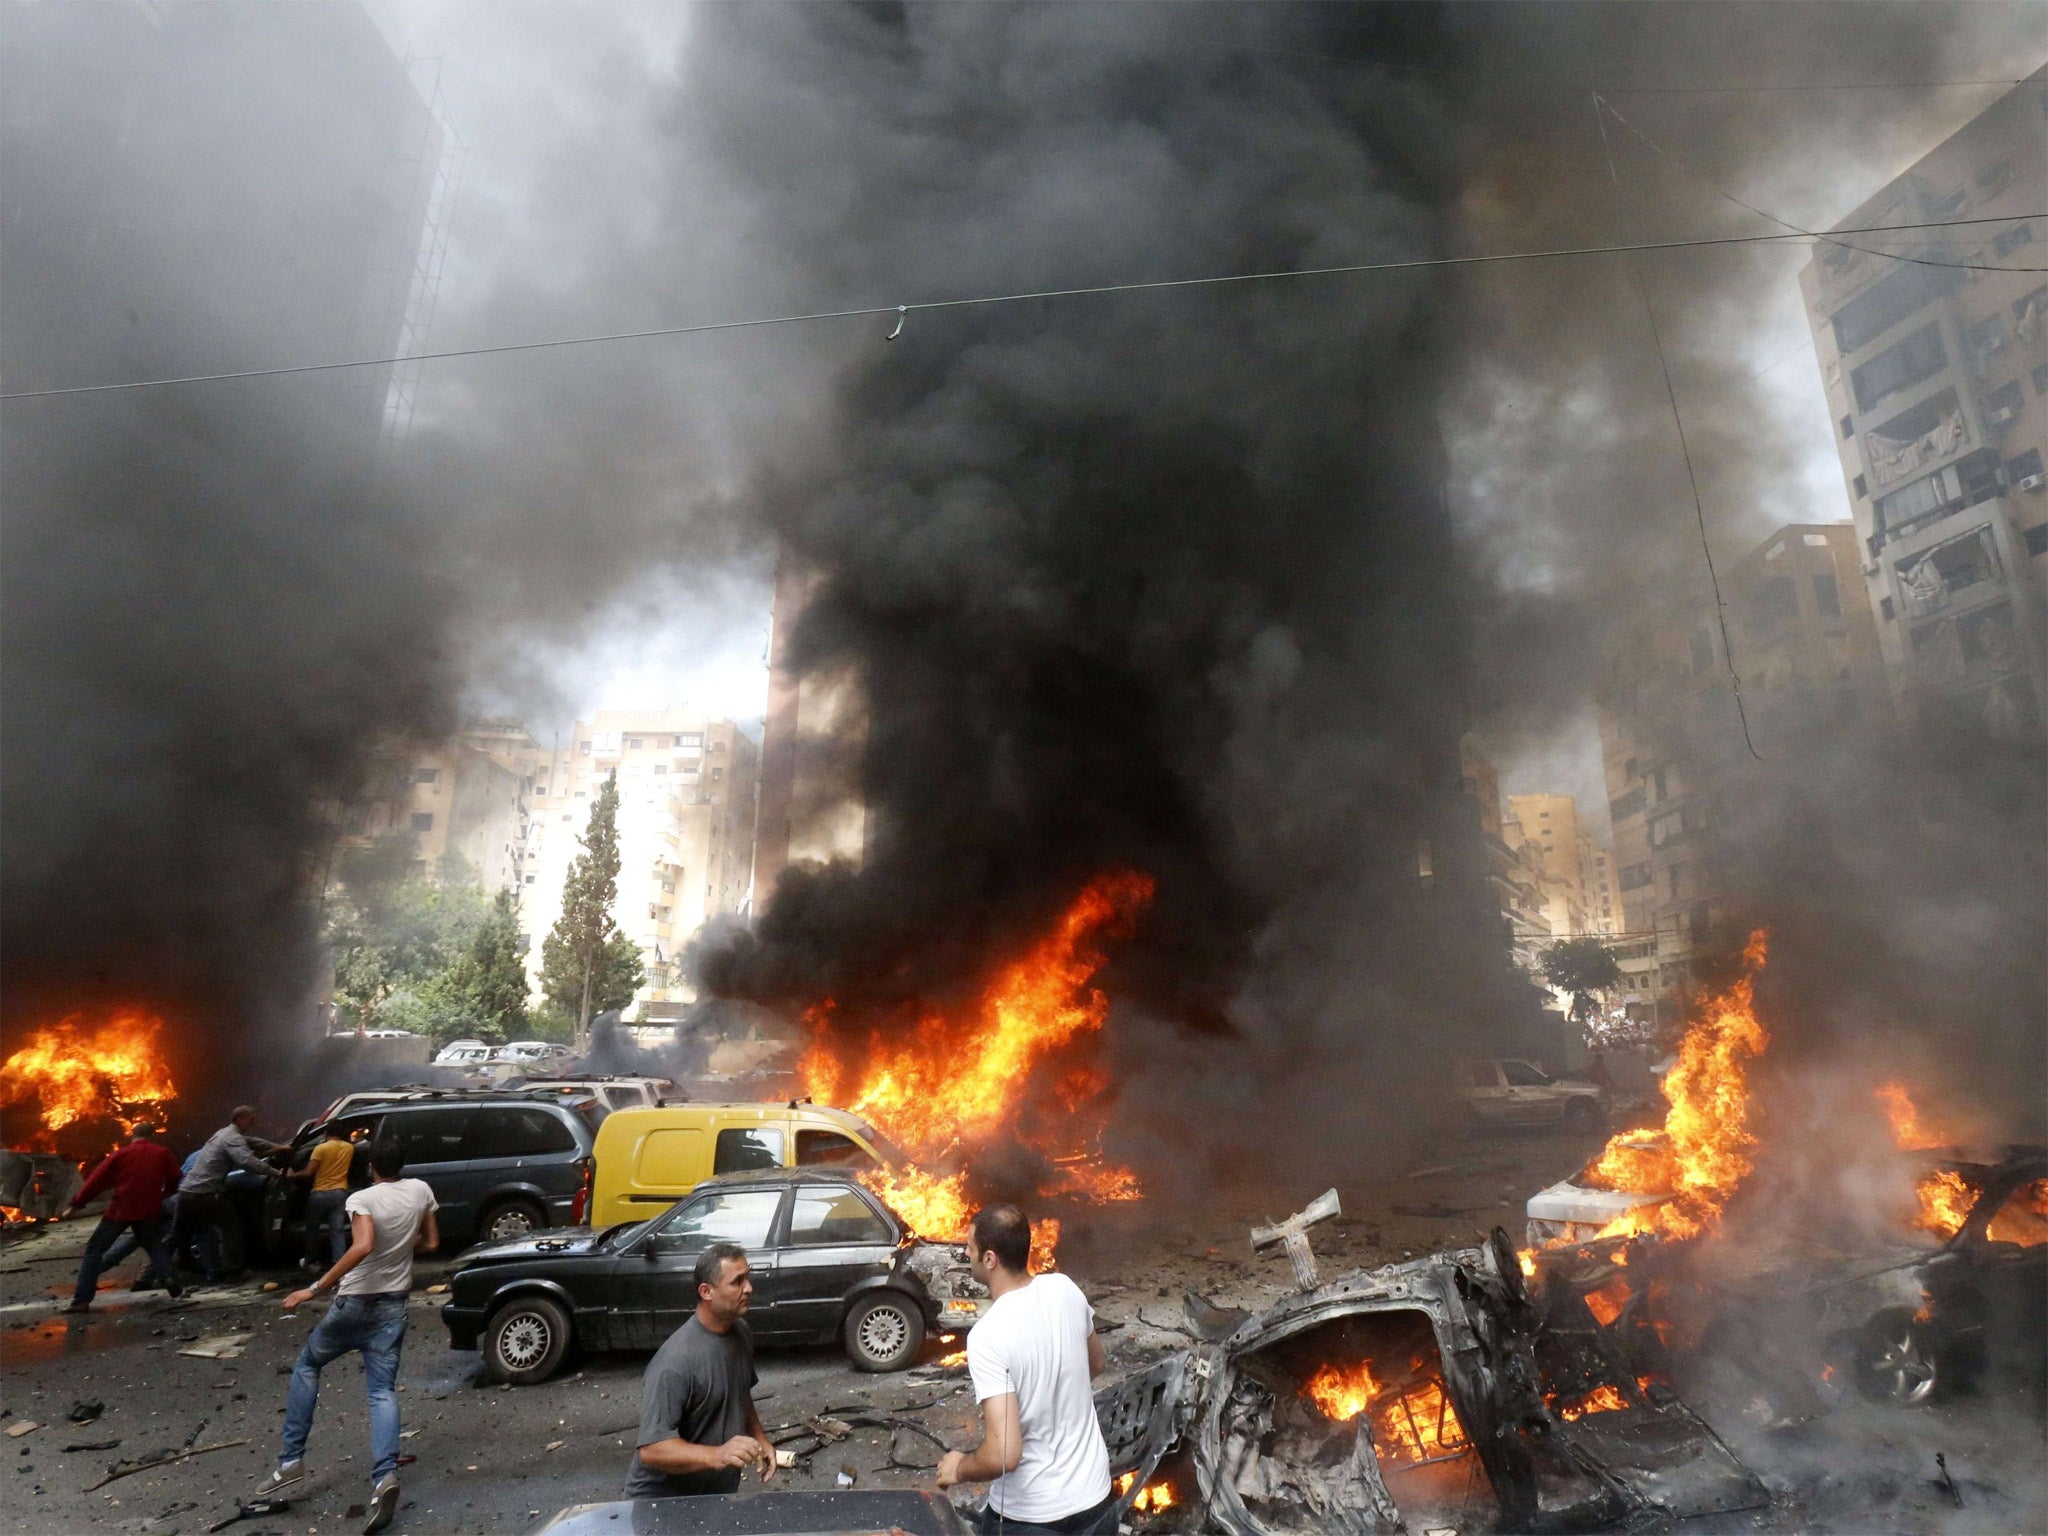 The explosion in the suburb of Beir el-Abed wounded 53 people. The blast, in Beir el-Abed, a suburb in the south of the capital, was reportedly caused by a car bomb left in a shopping centre, near offices of Hezbollah officials.